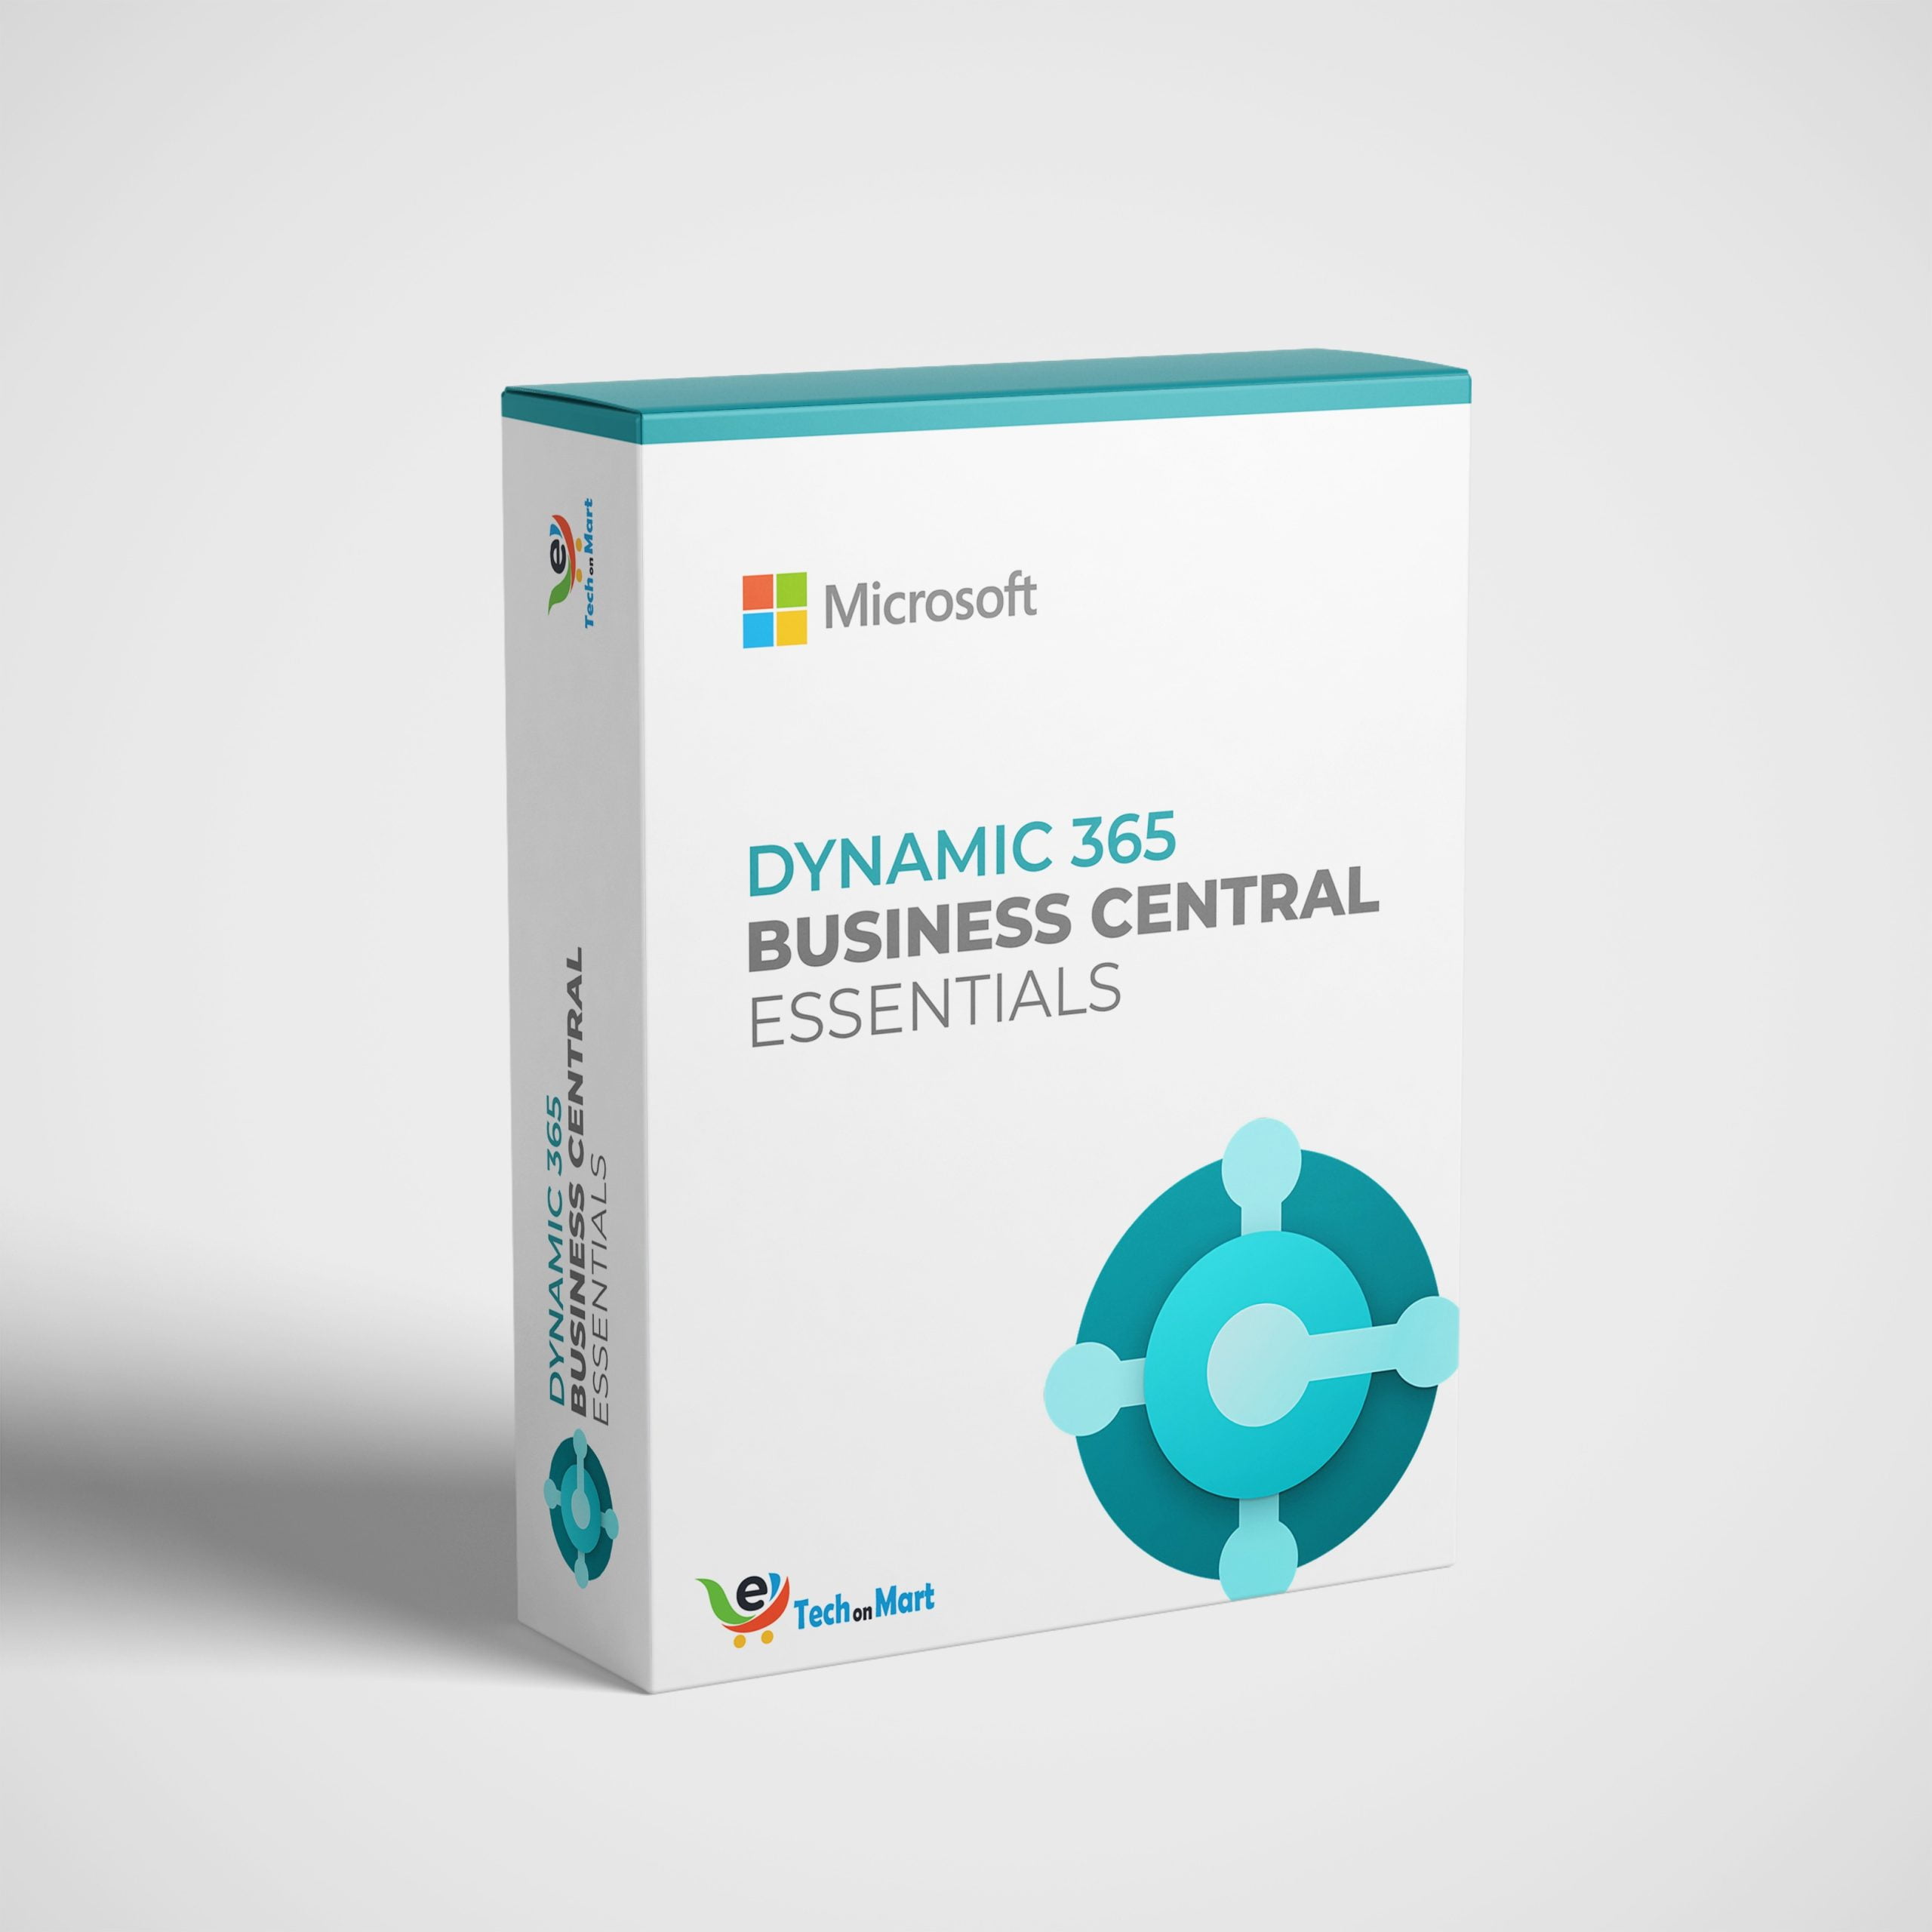 Dynamic 365 Business Central Essentials